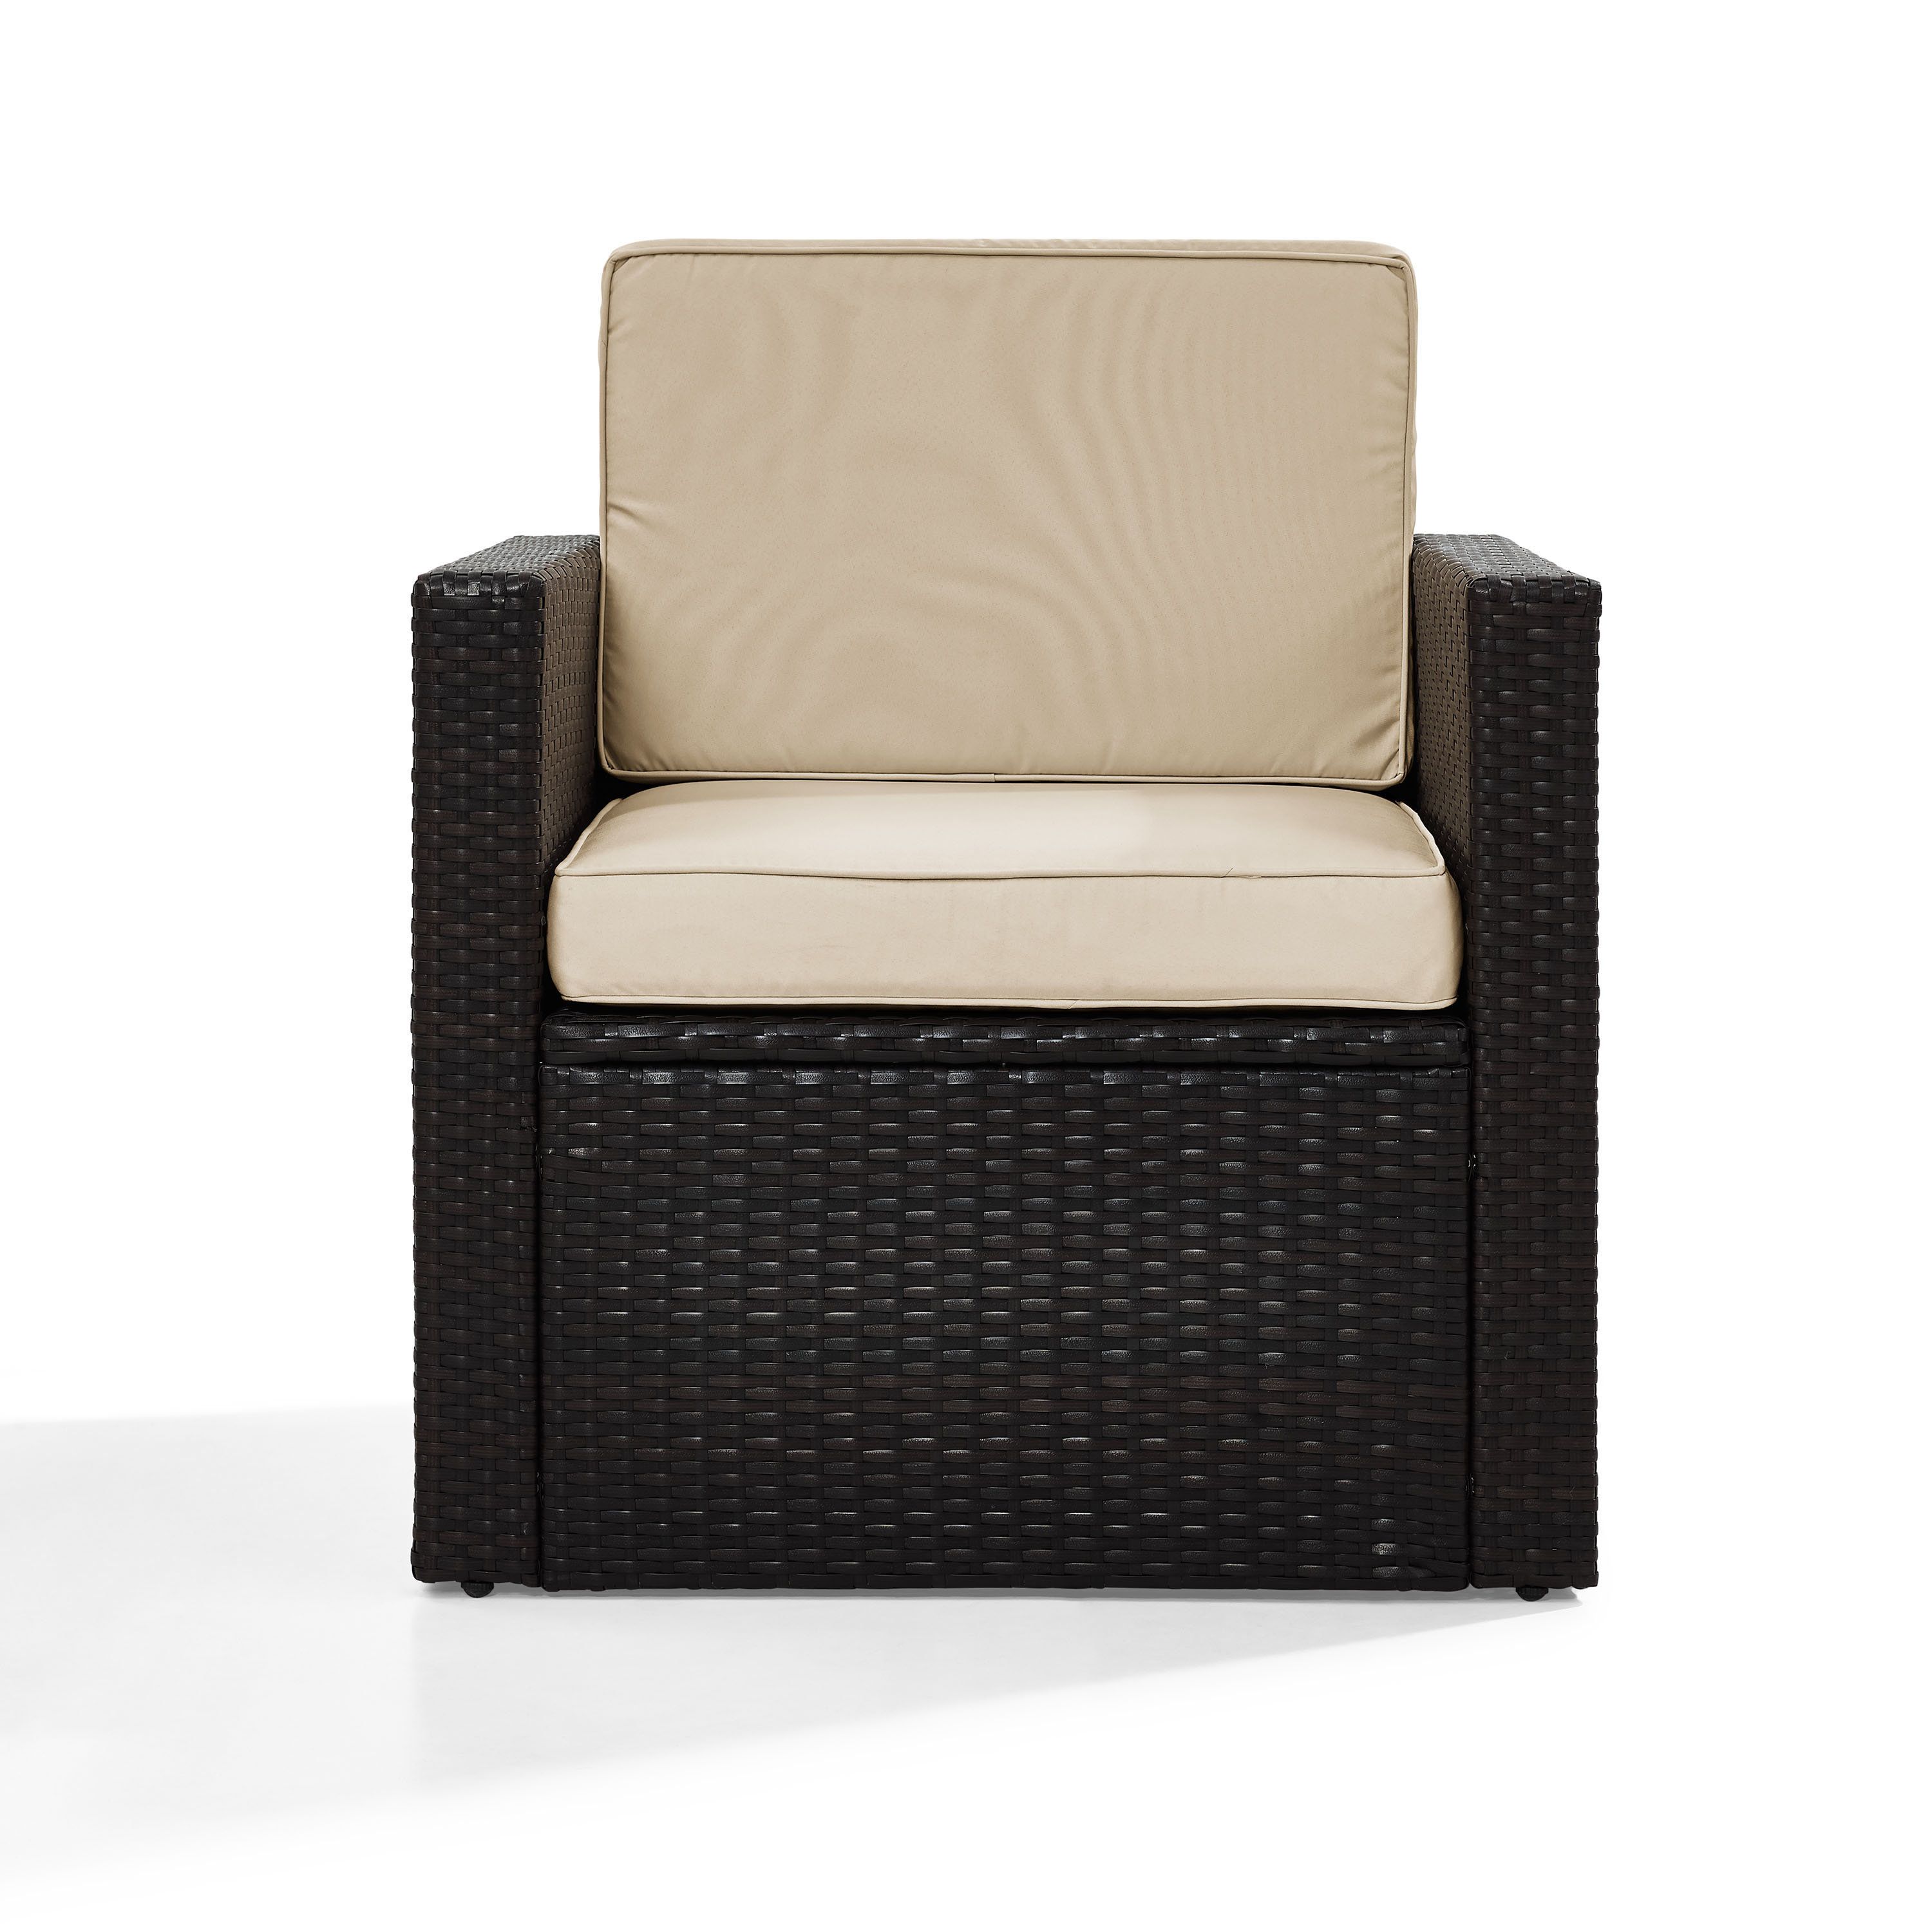 Belton Patio Sofas With Cushions Intended For 2019 Belton Outdoor Wicker Deep Seating Patio Chair With Cushion (Photo 5 of 25)